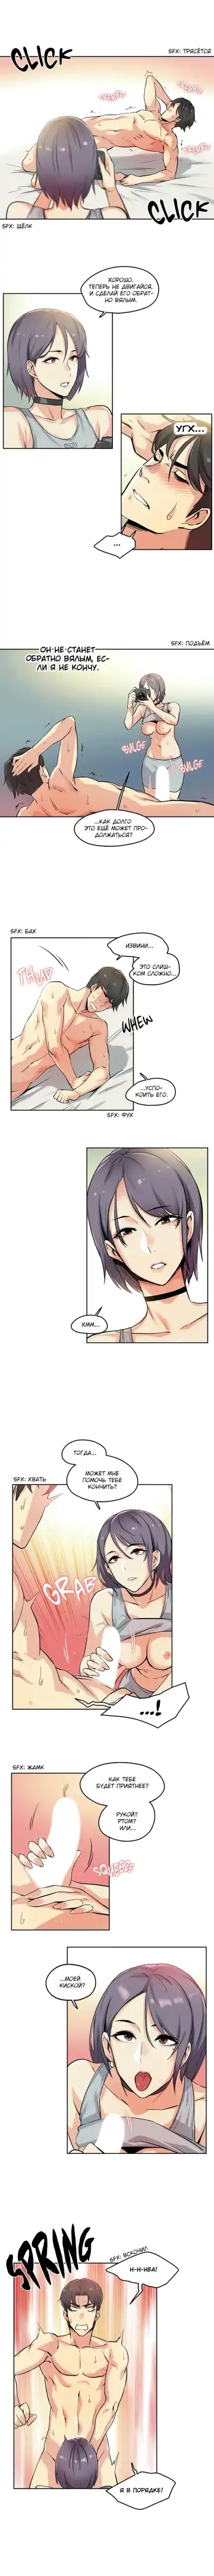 [Gamang] DADDY'S WILD OATS | Surrogate Father Ch. 1-16 Fhentai.net - Page 88